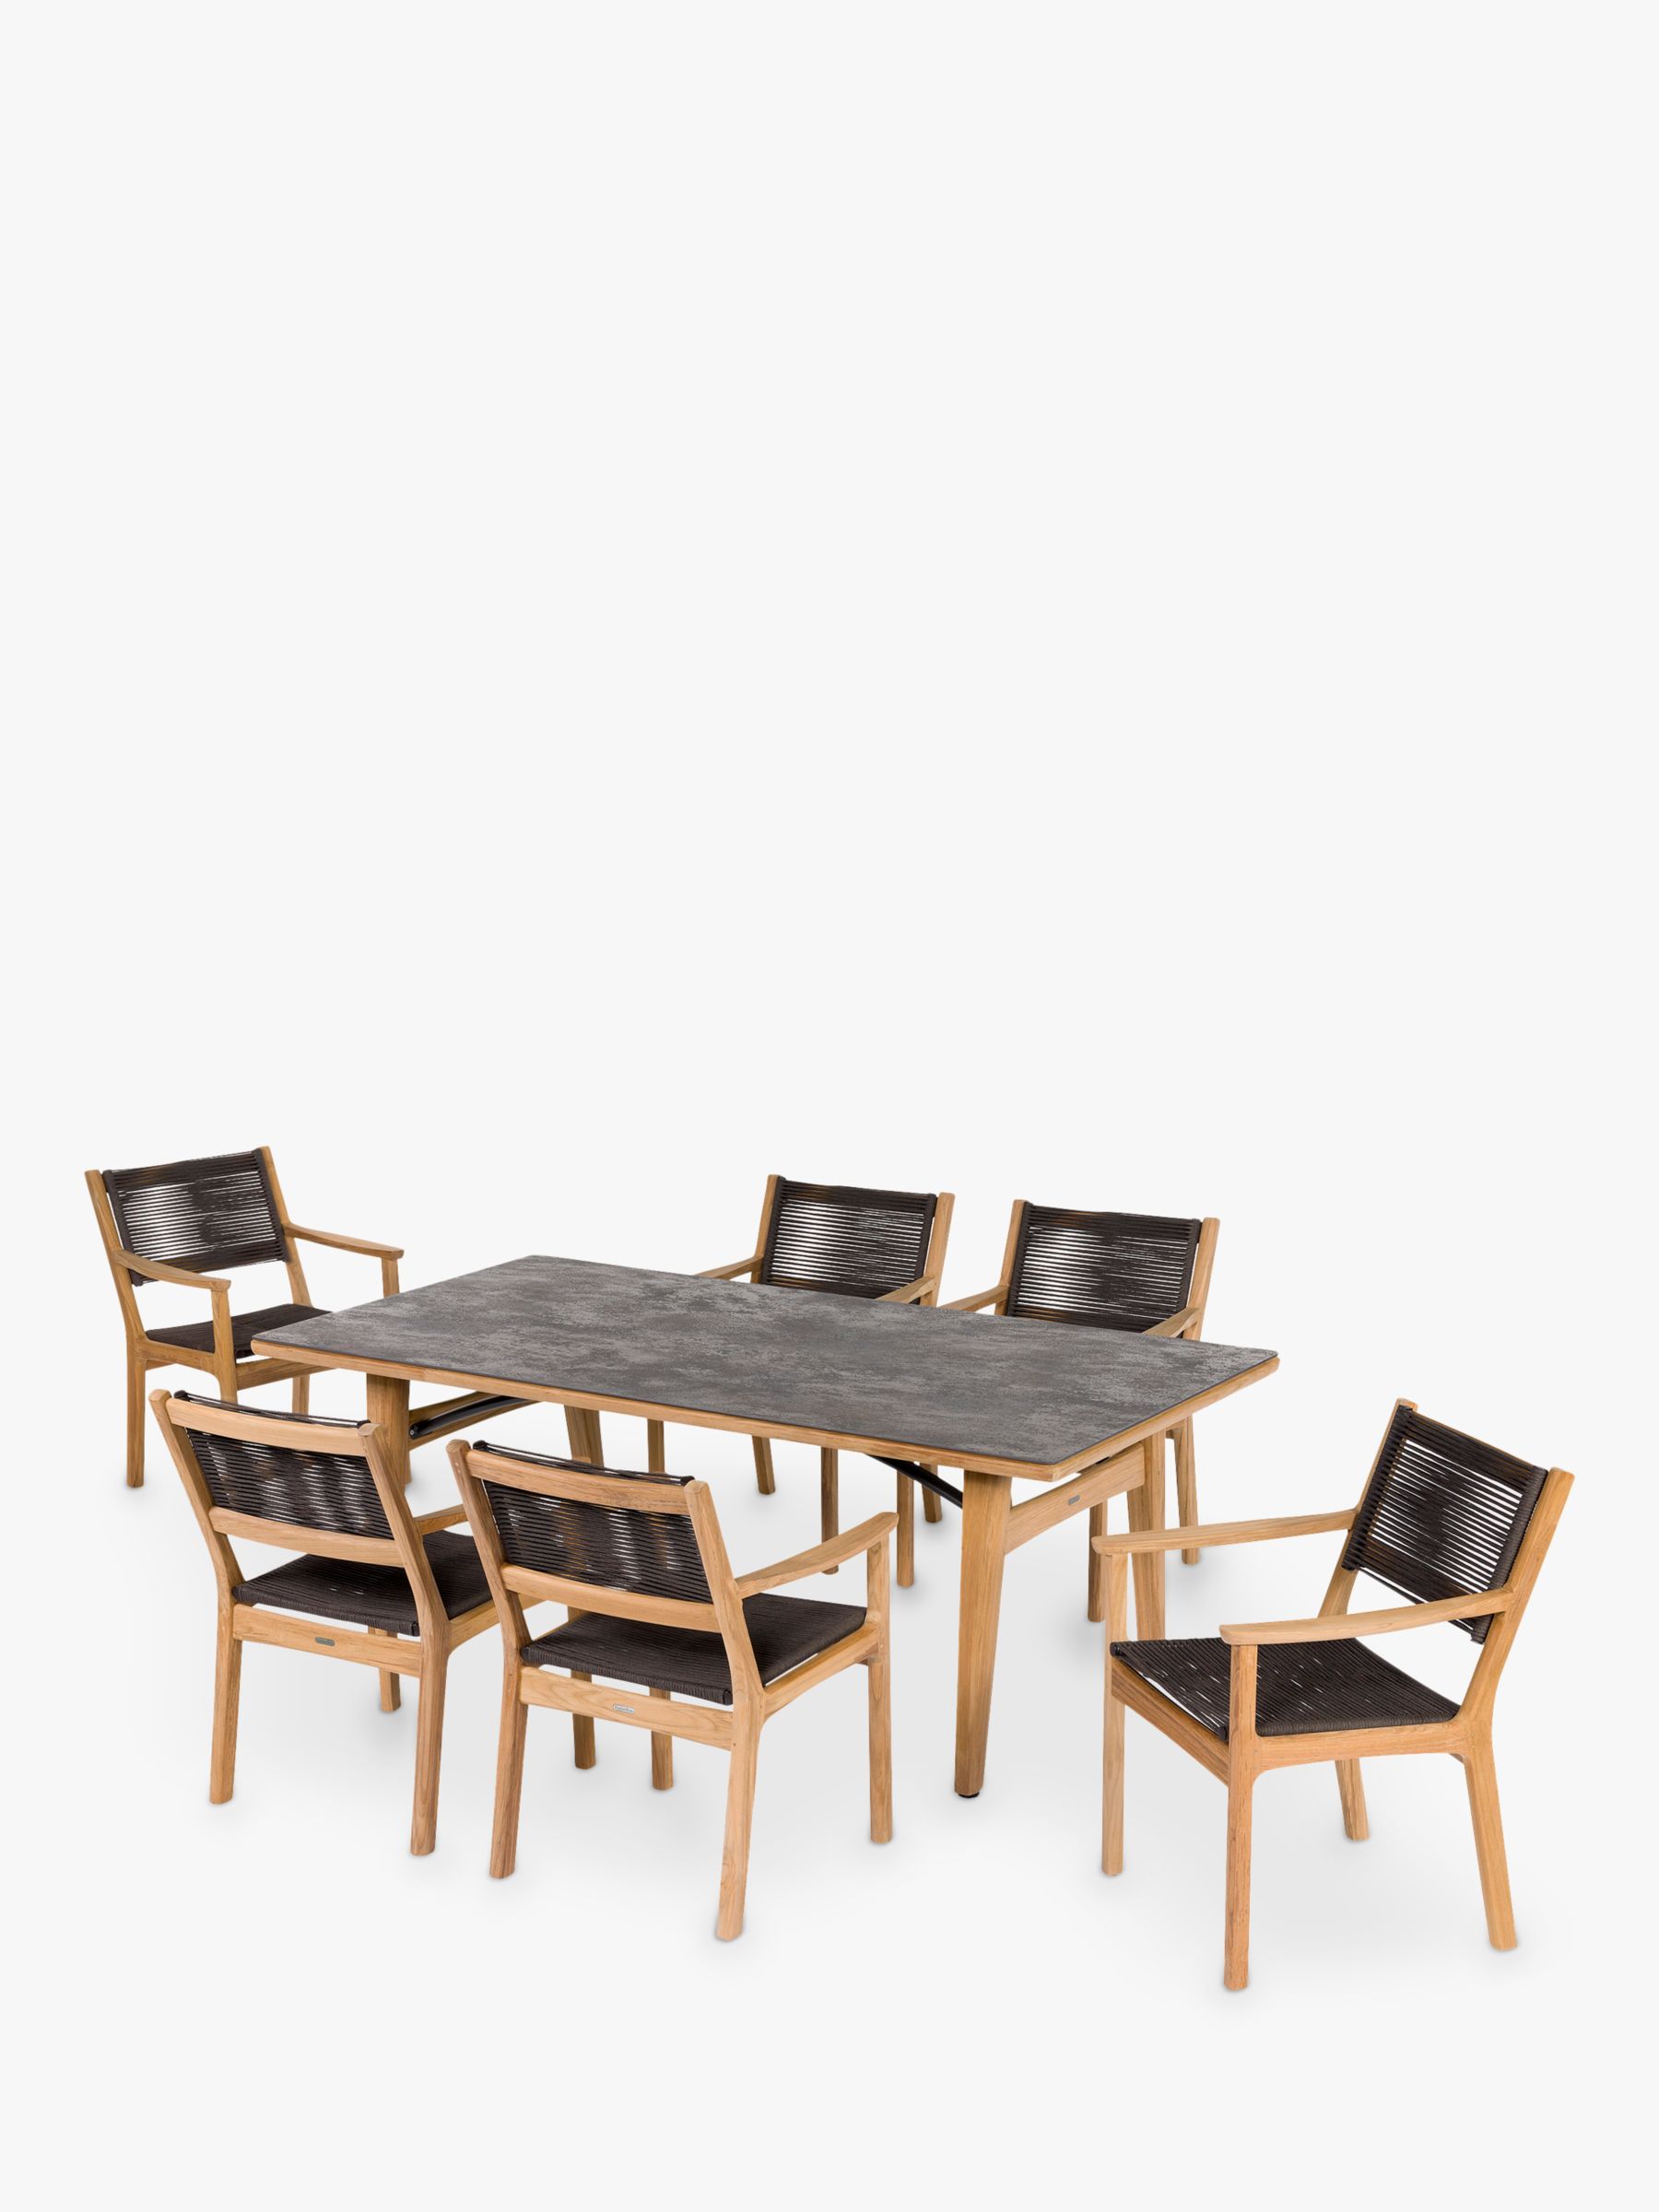 Photo of Barlow tyrie monterey 6-seater teak wood garden dining table & chairs set natural/chalk